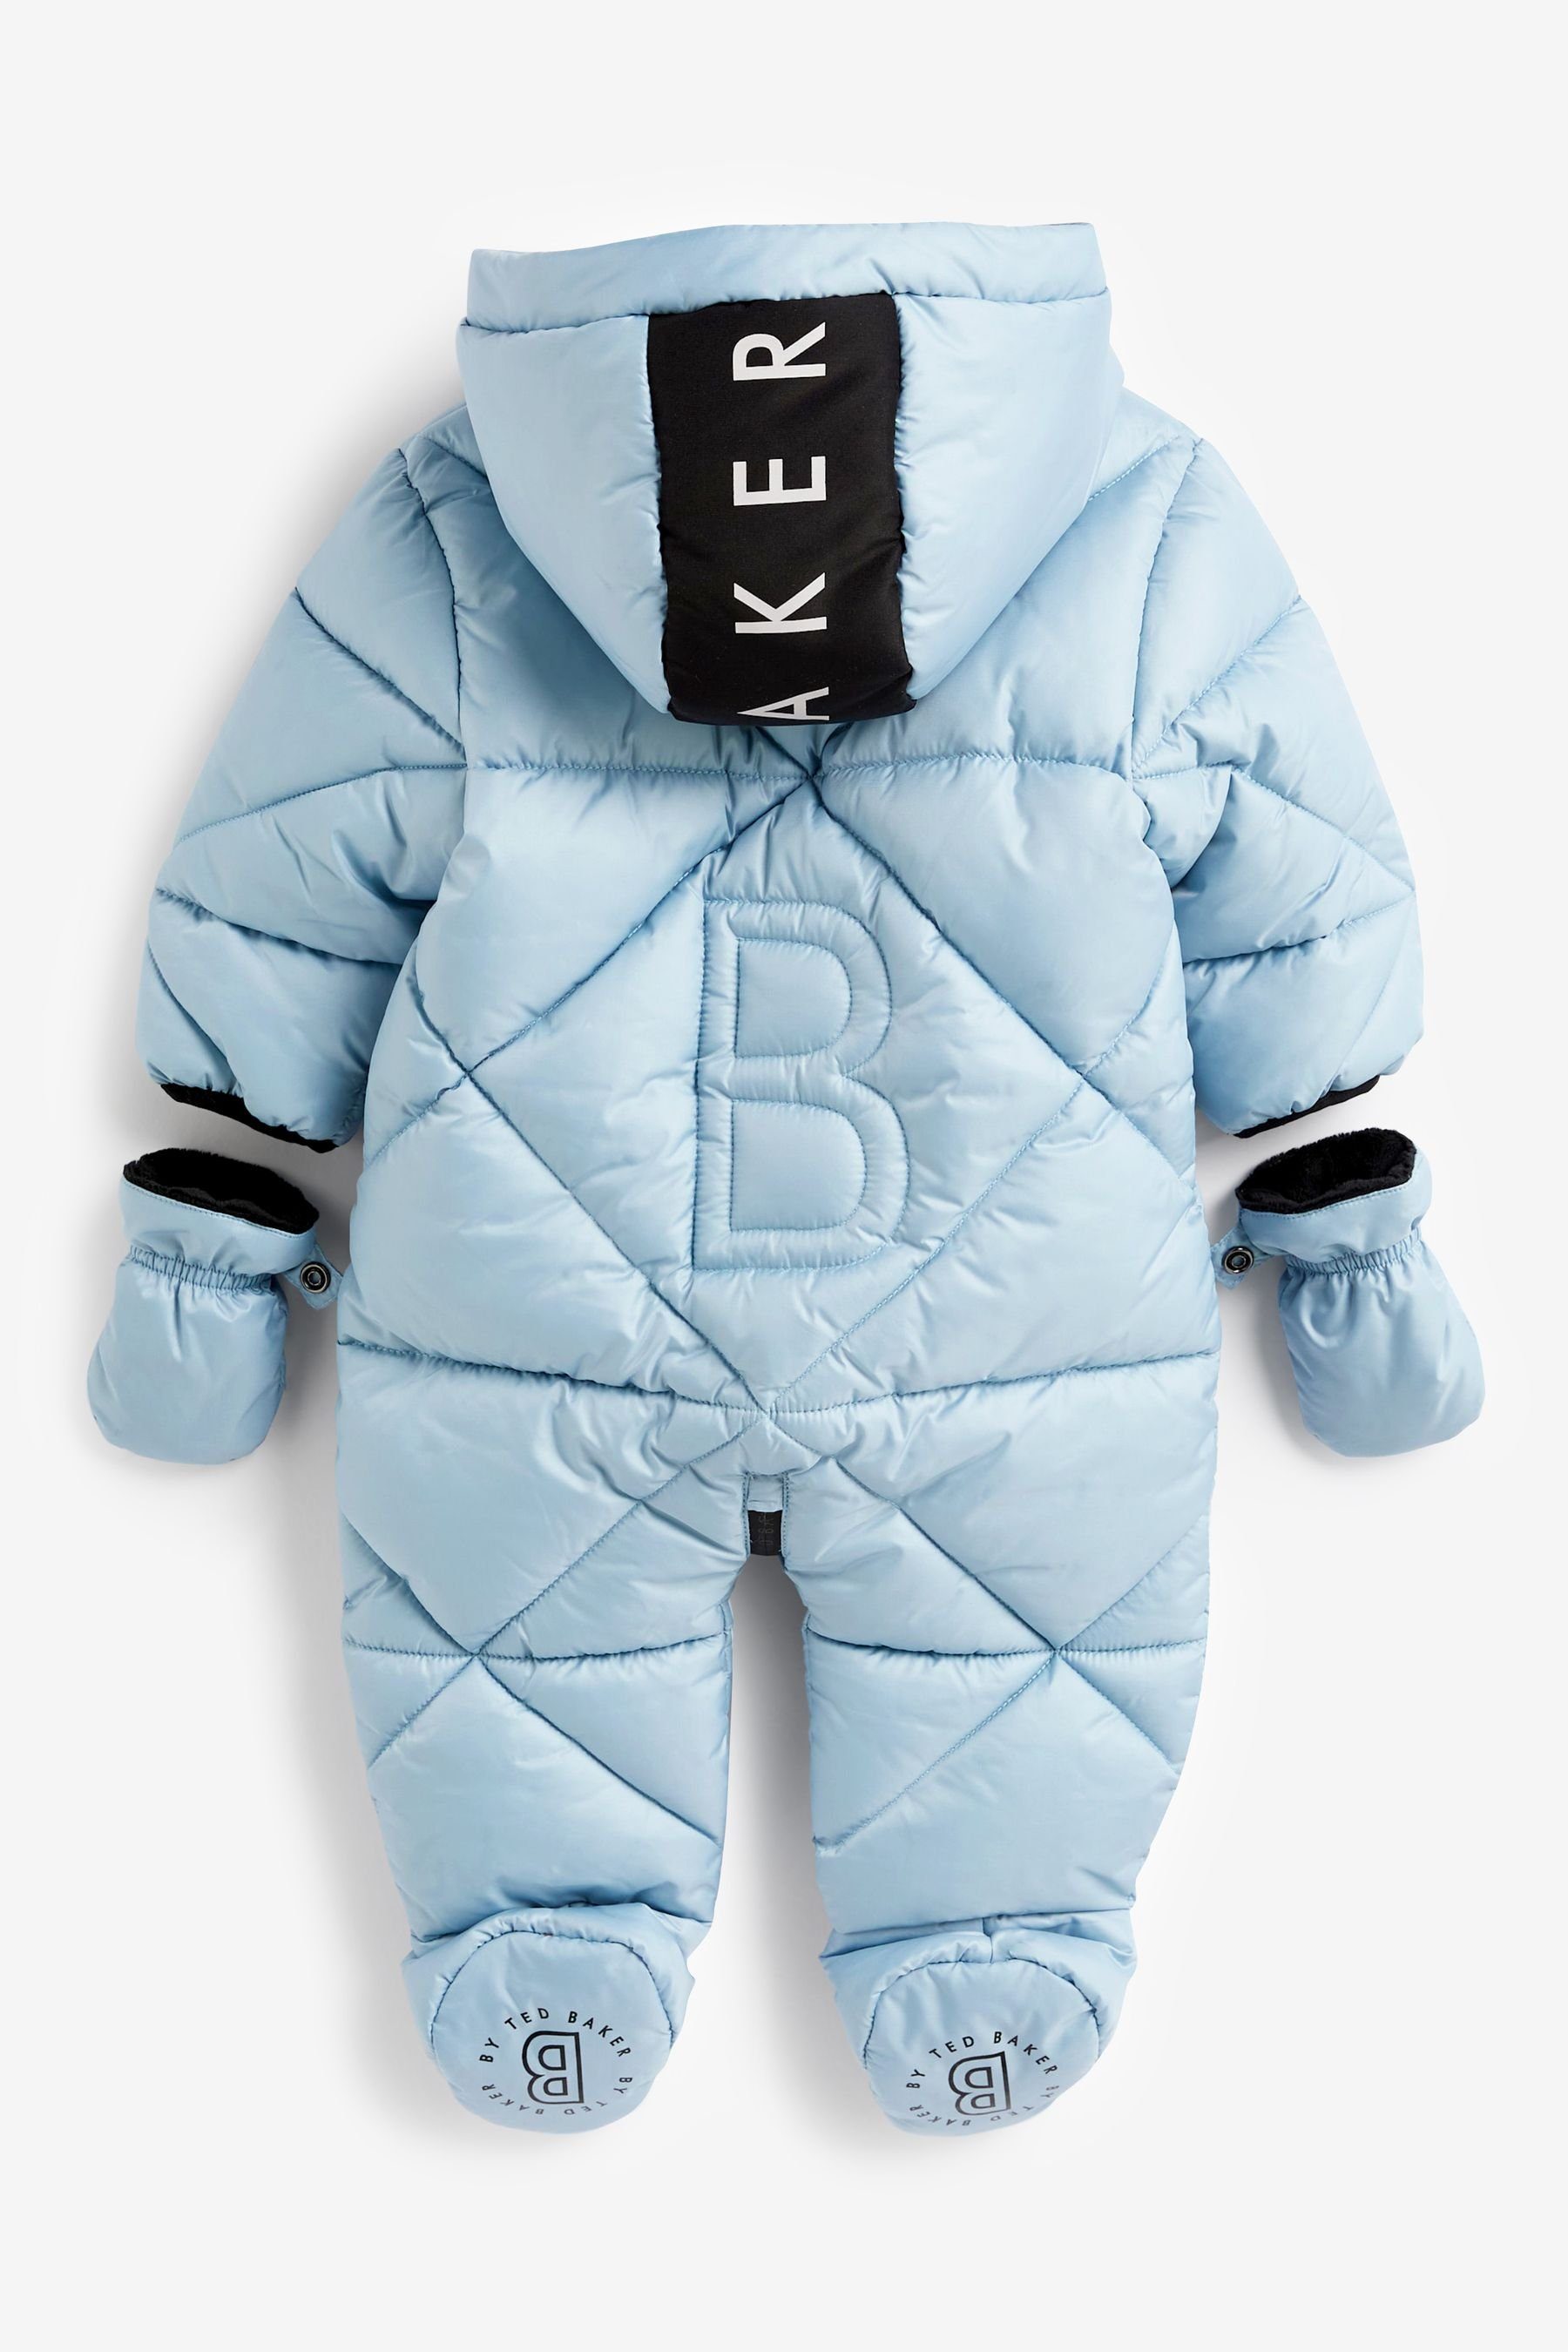 Blue Schneeoverall by by Baker Wasserabweisender Baker Baker (1-tlg) Schneeanzug Ted Baker Ted